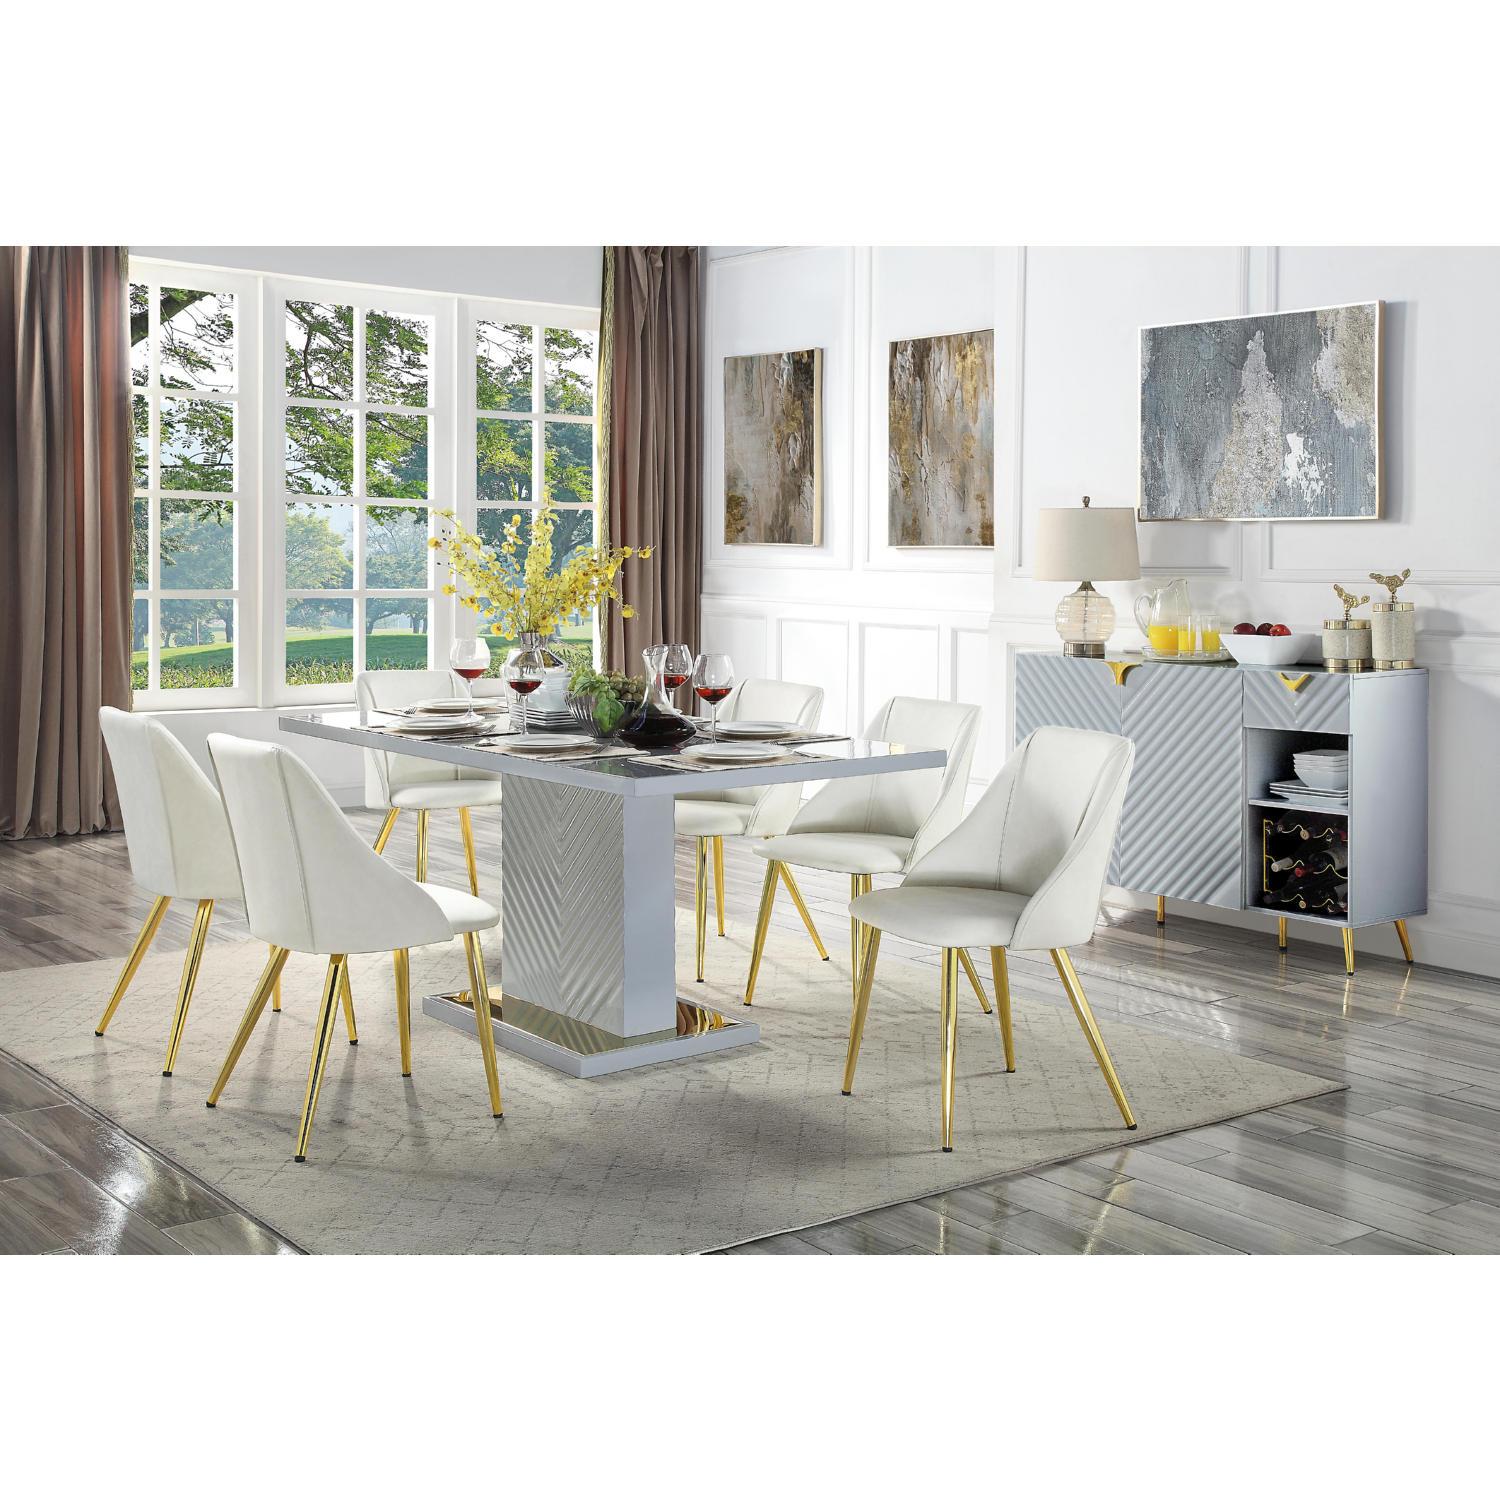 Modern, Casual Dining Room Set Gaines DN01261-8pcs in Gray 